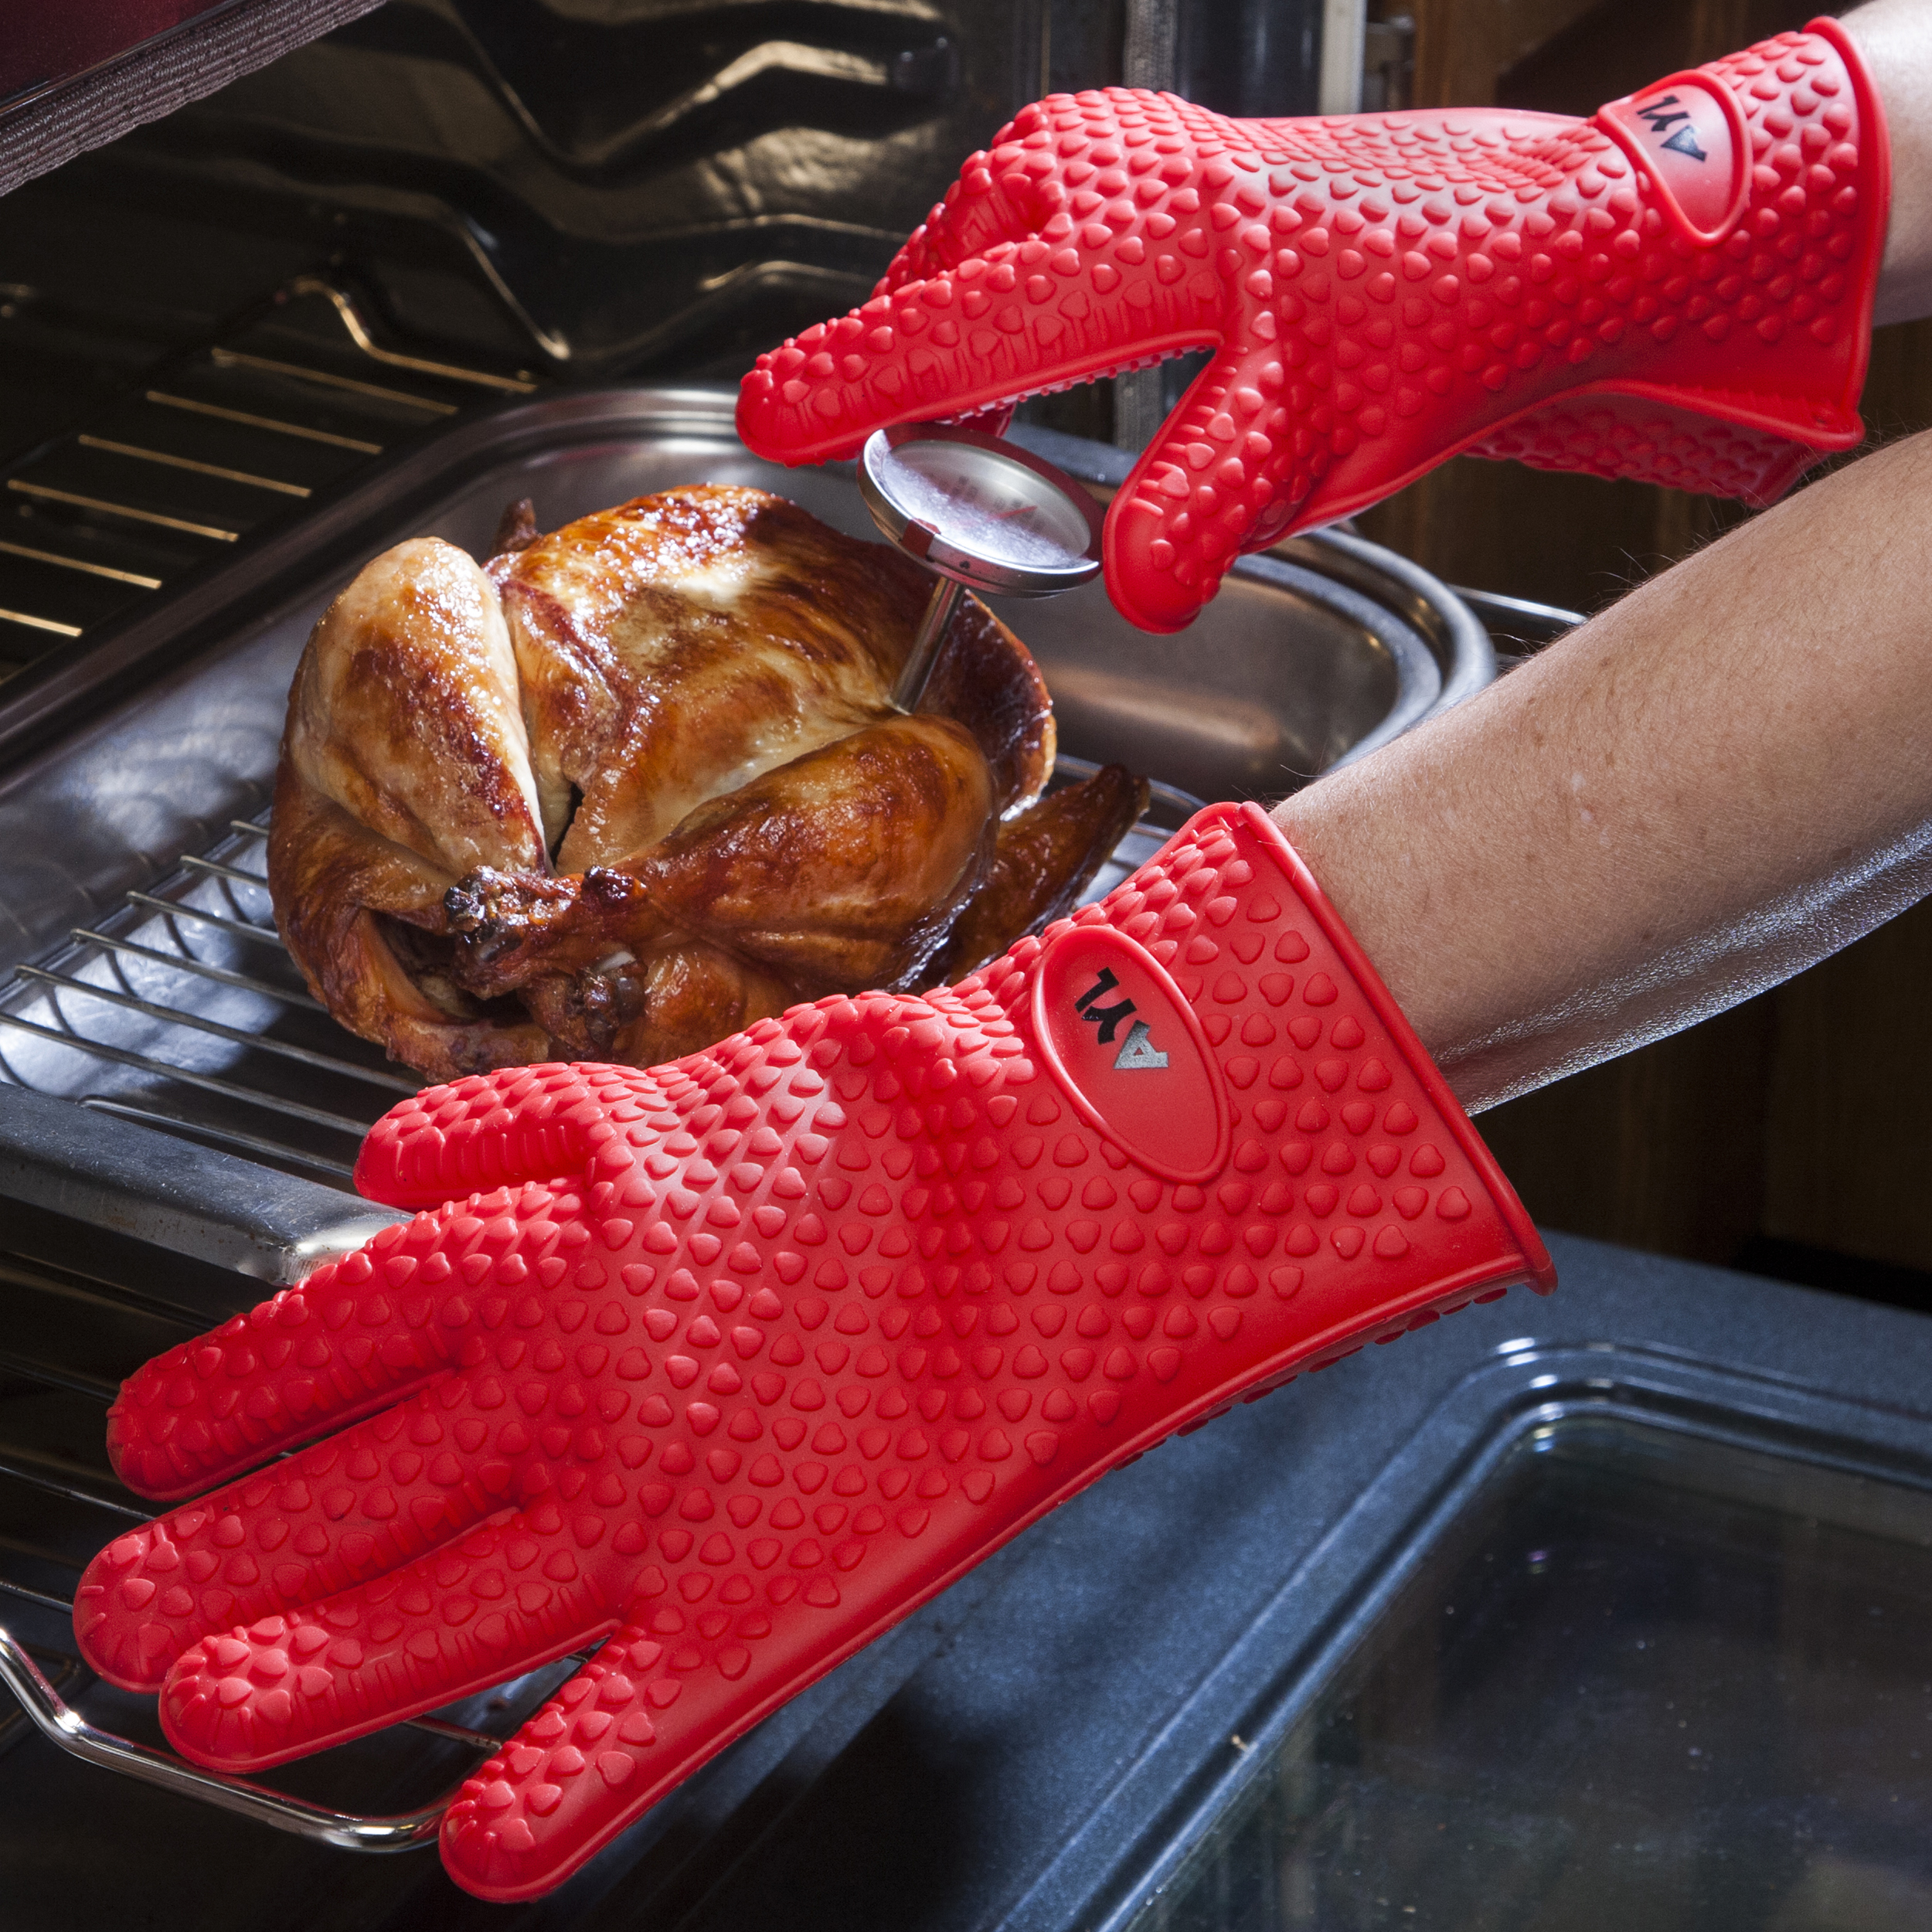 AYL Grilling Gloves, Heat Resistant Gloves BBQ Kitchen Silicone Oven  Gloves, Safe Handling of Hot Food, Pots and Pans for Barbecue, Cooking,  Baking 